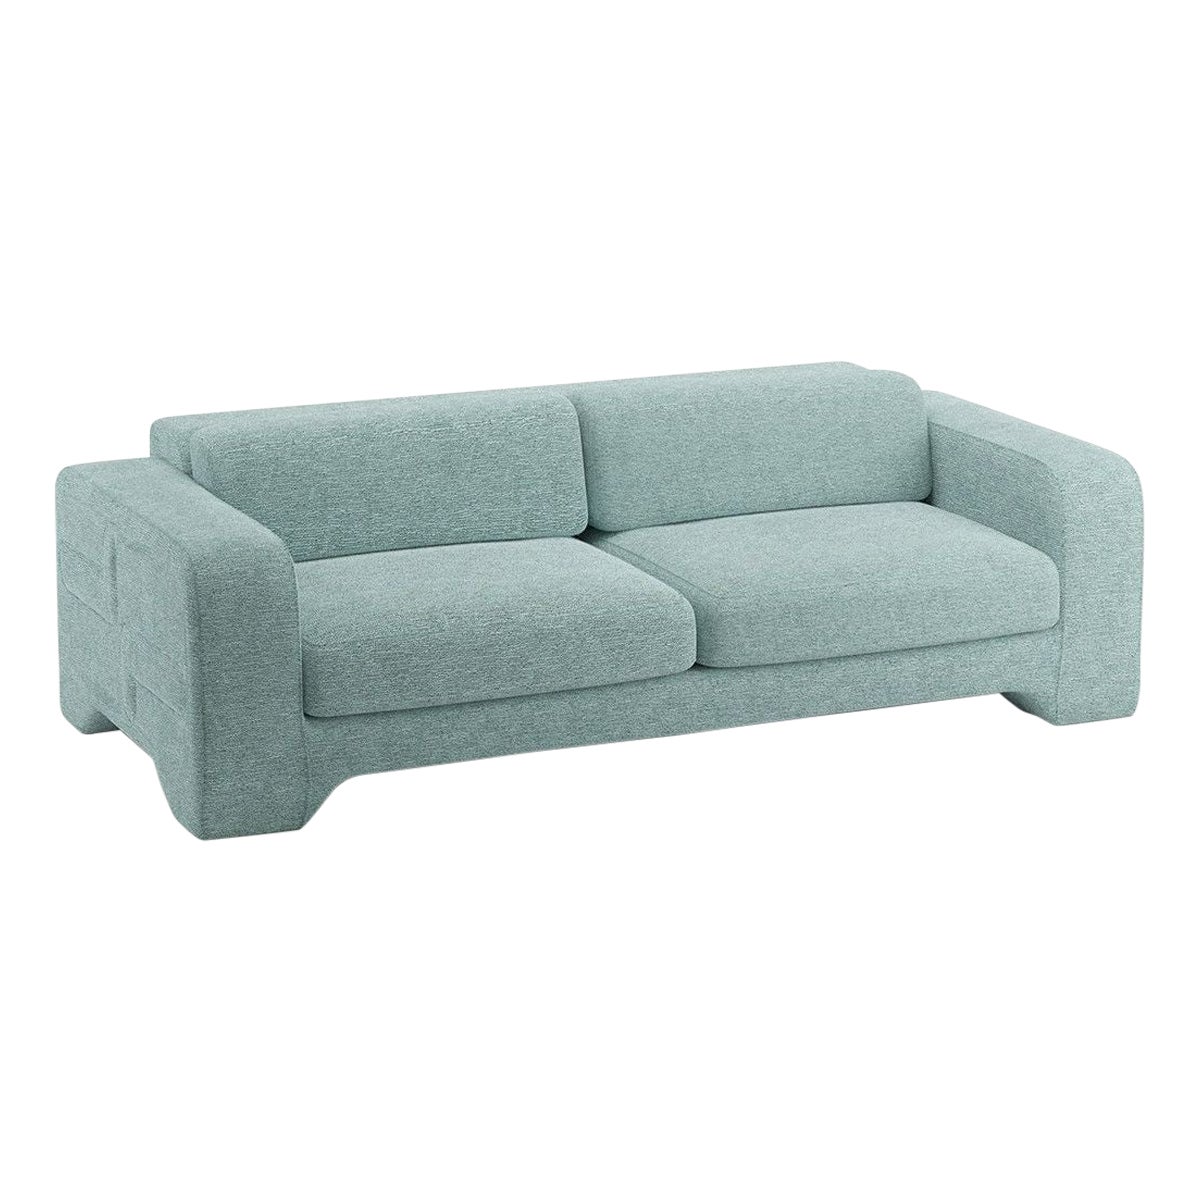 Popus Editions Giovanna 4 Seater Sofa in Mint Megeve Fabric with a Knit Effect For Sale